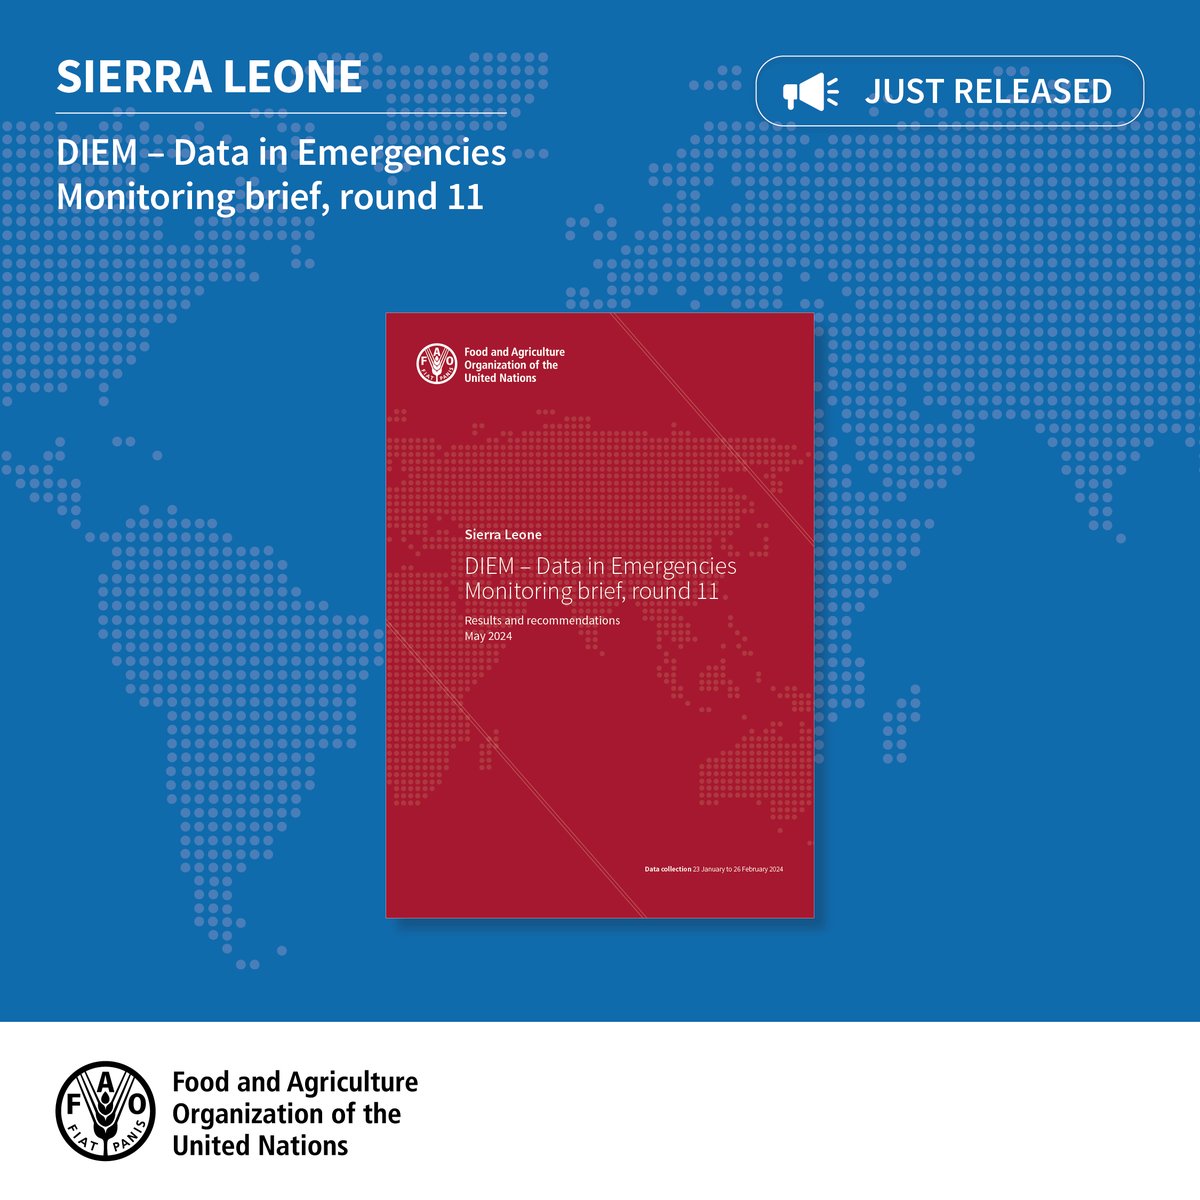 Thanks to funding from @USAIDSavesLives, results from round 11 of the @FAO #DataInEmergencies household monitoring survey in #SierraLeone have been released. Learn more about the impacts of shocks on livelihoods and #FoodSecurity here 👉bit.ly/3UYi4xo #InvestInHumanity